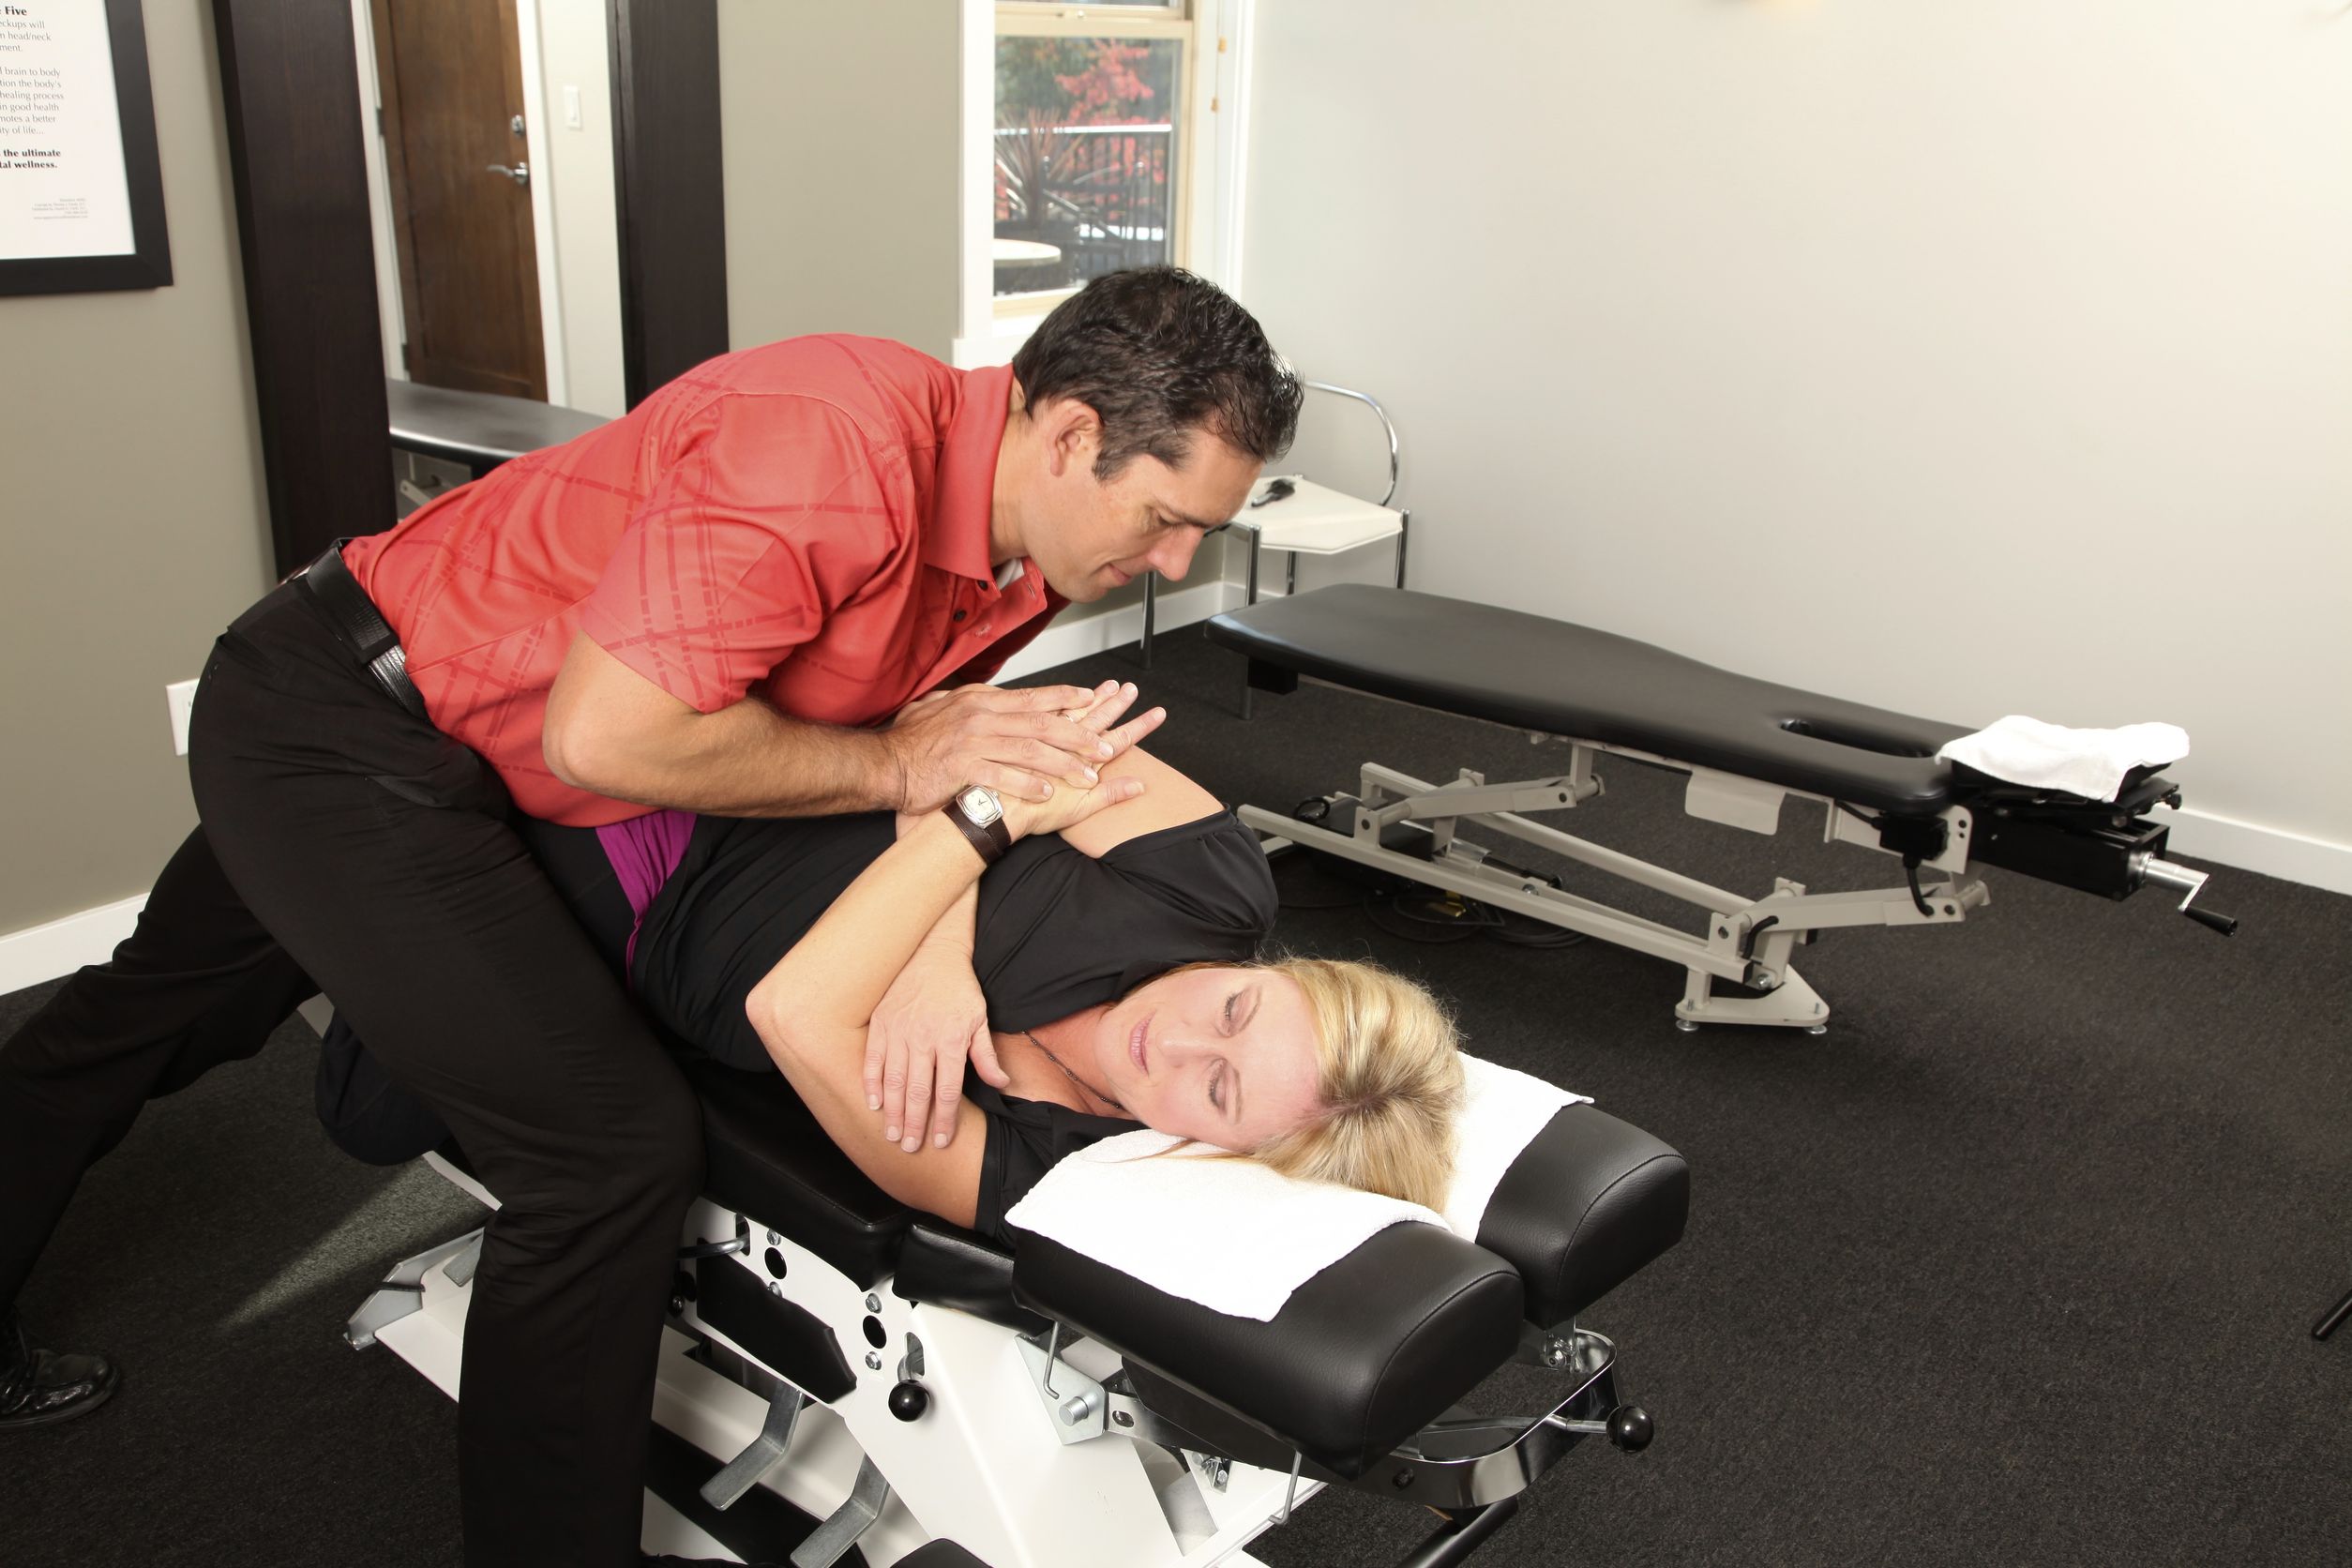 Learn About Massage Therapy in Saskatoon at a Respected Career College